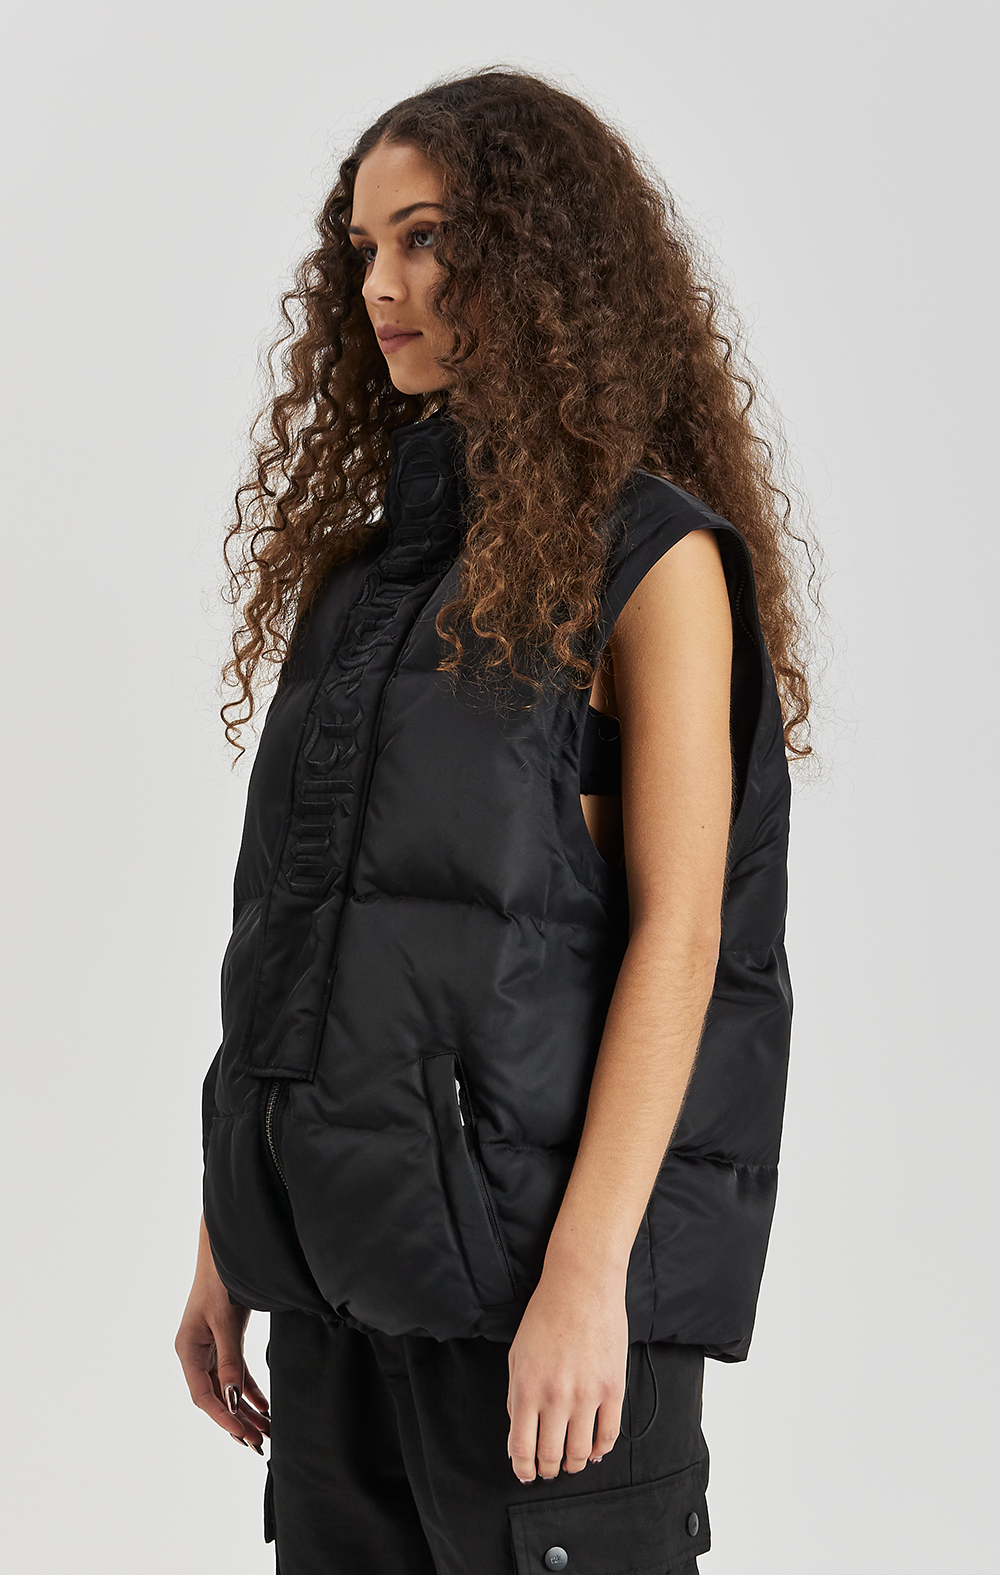 Triple Black Two-In-One Puffer